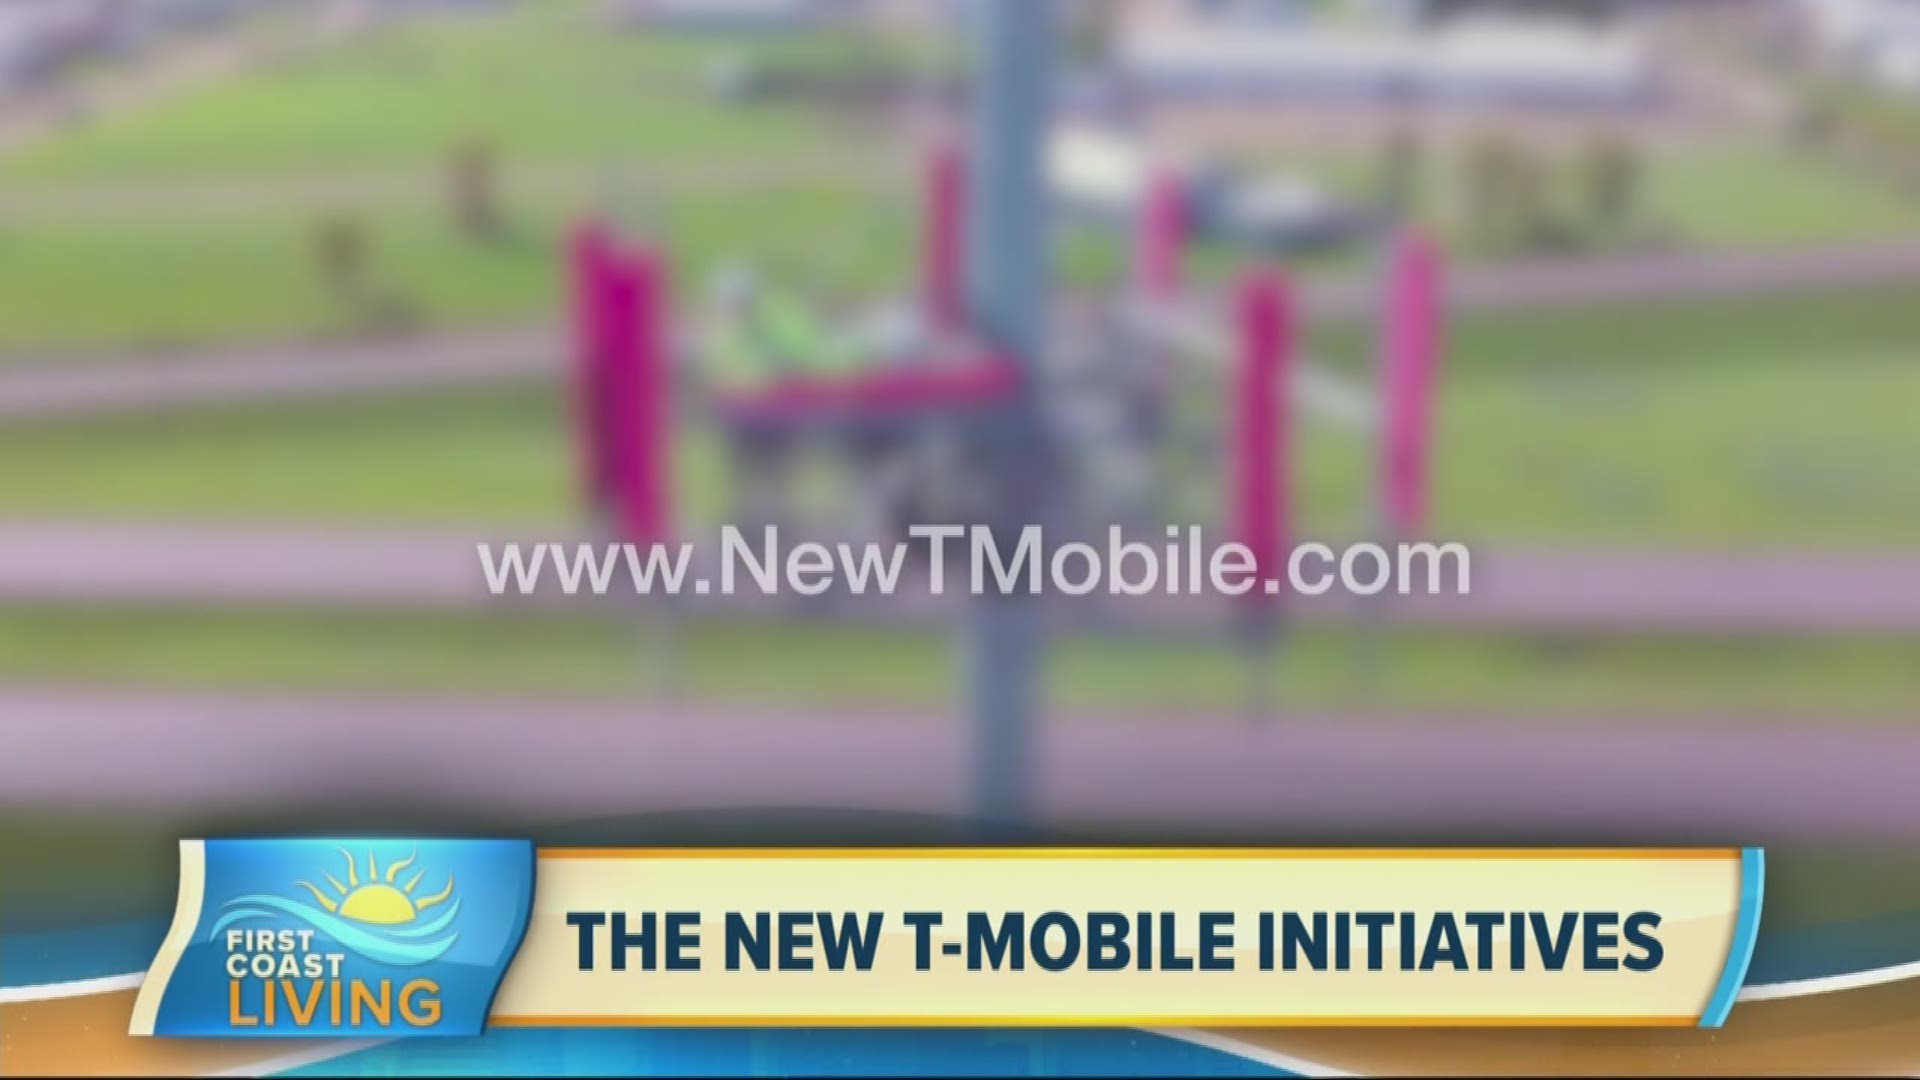 T-Mobile is making big changes to its network!